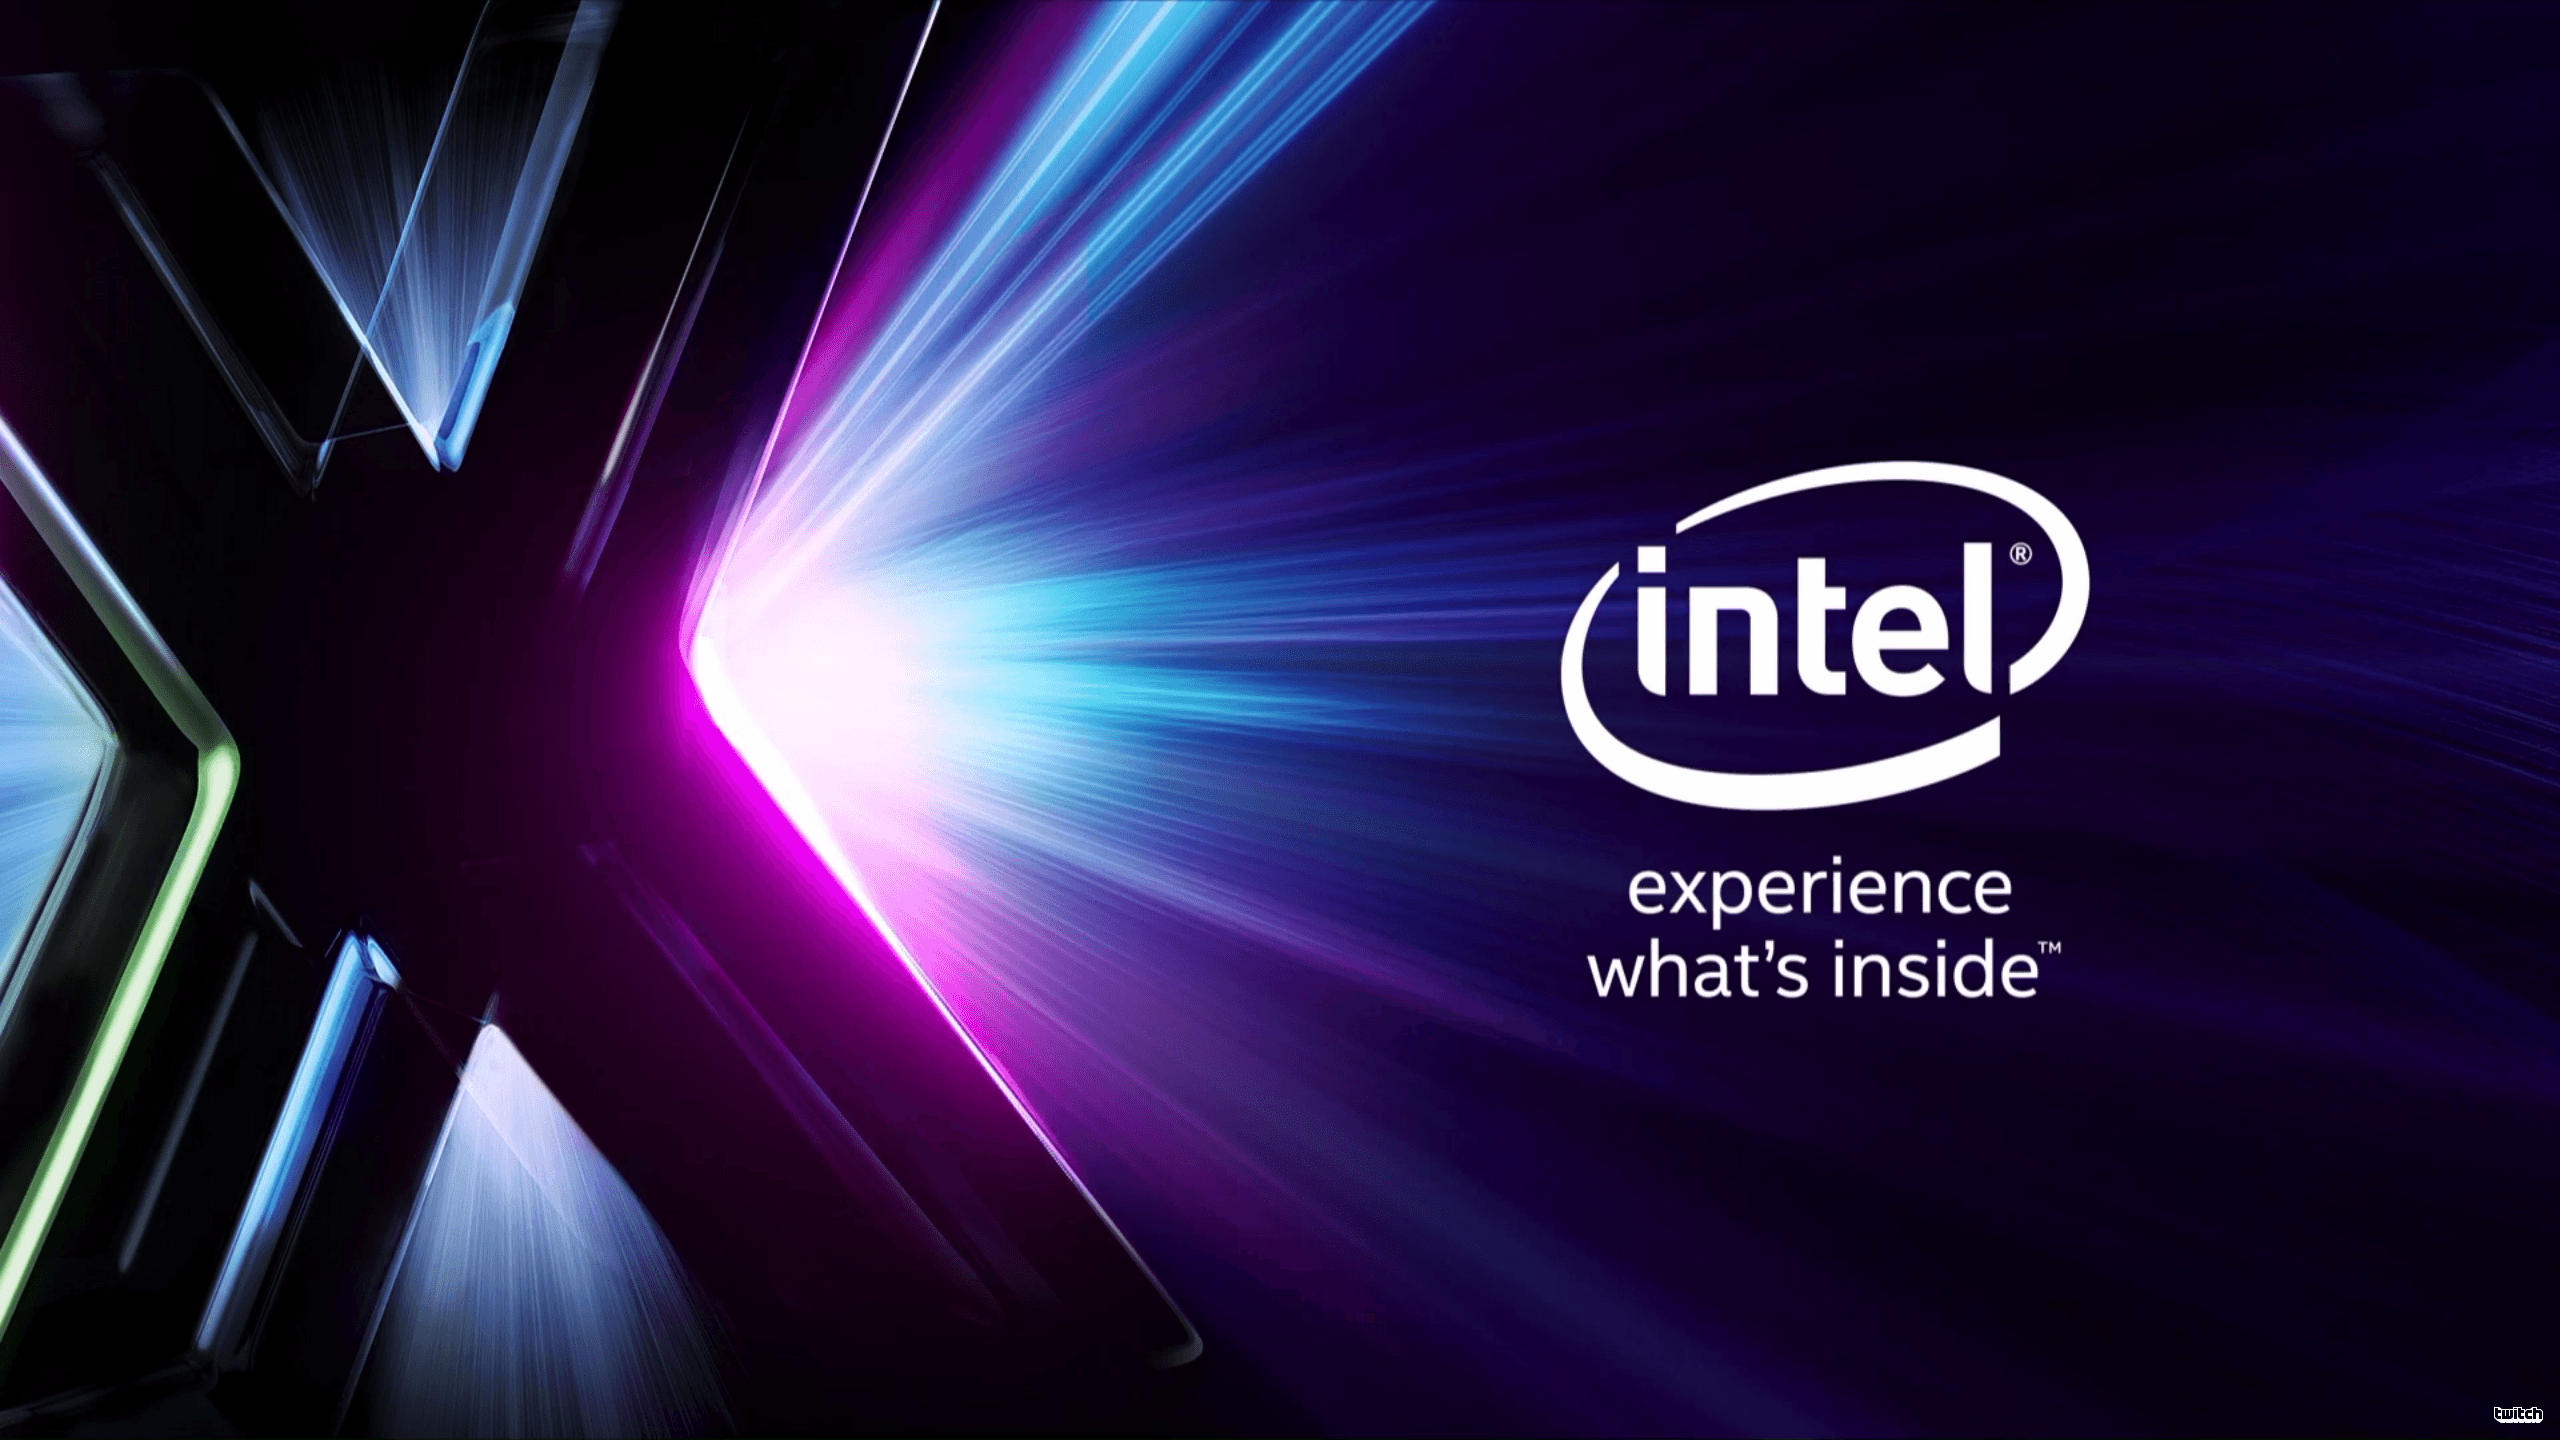 Intel I7 Wallpapers Top Free Intel I7 Backgrounds Wallpaperaccess 6093